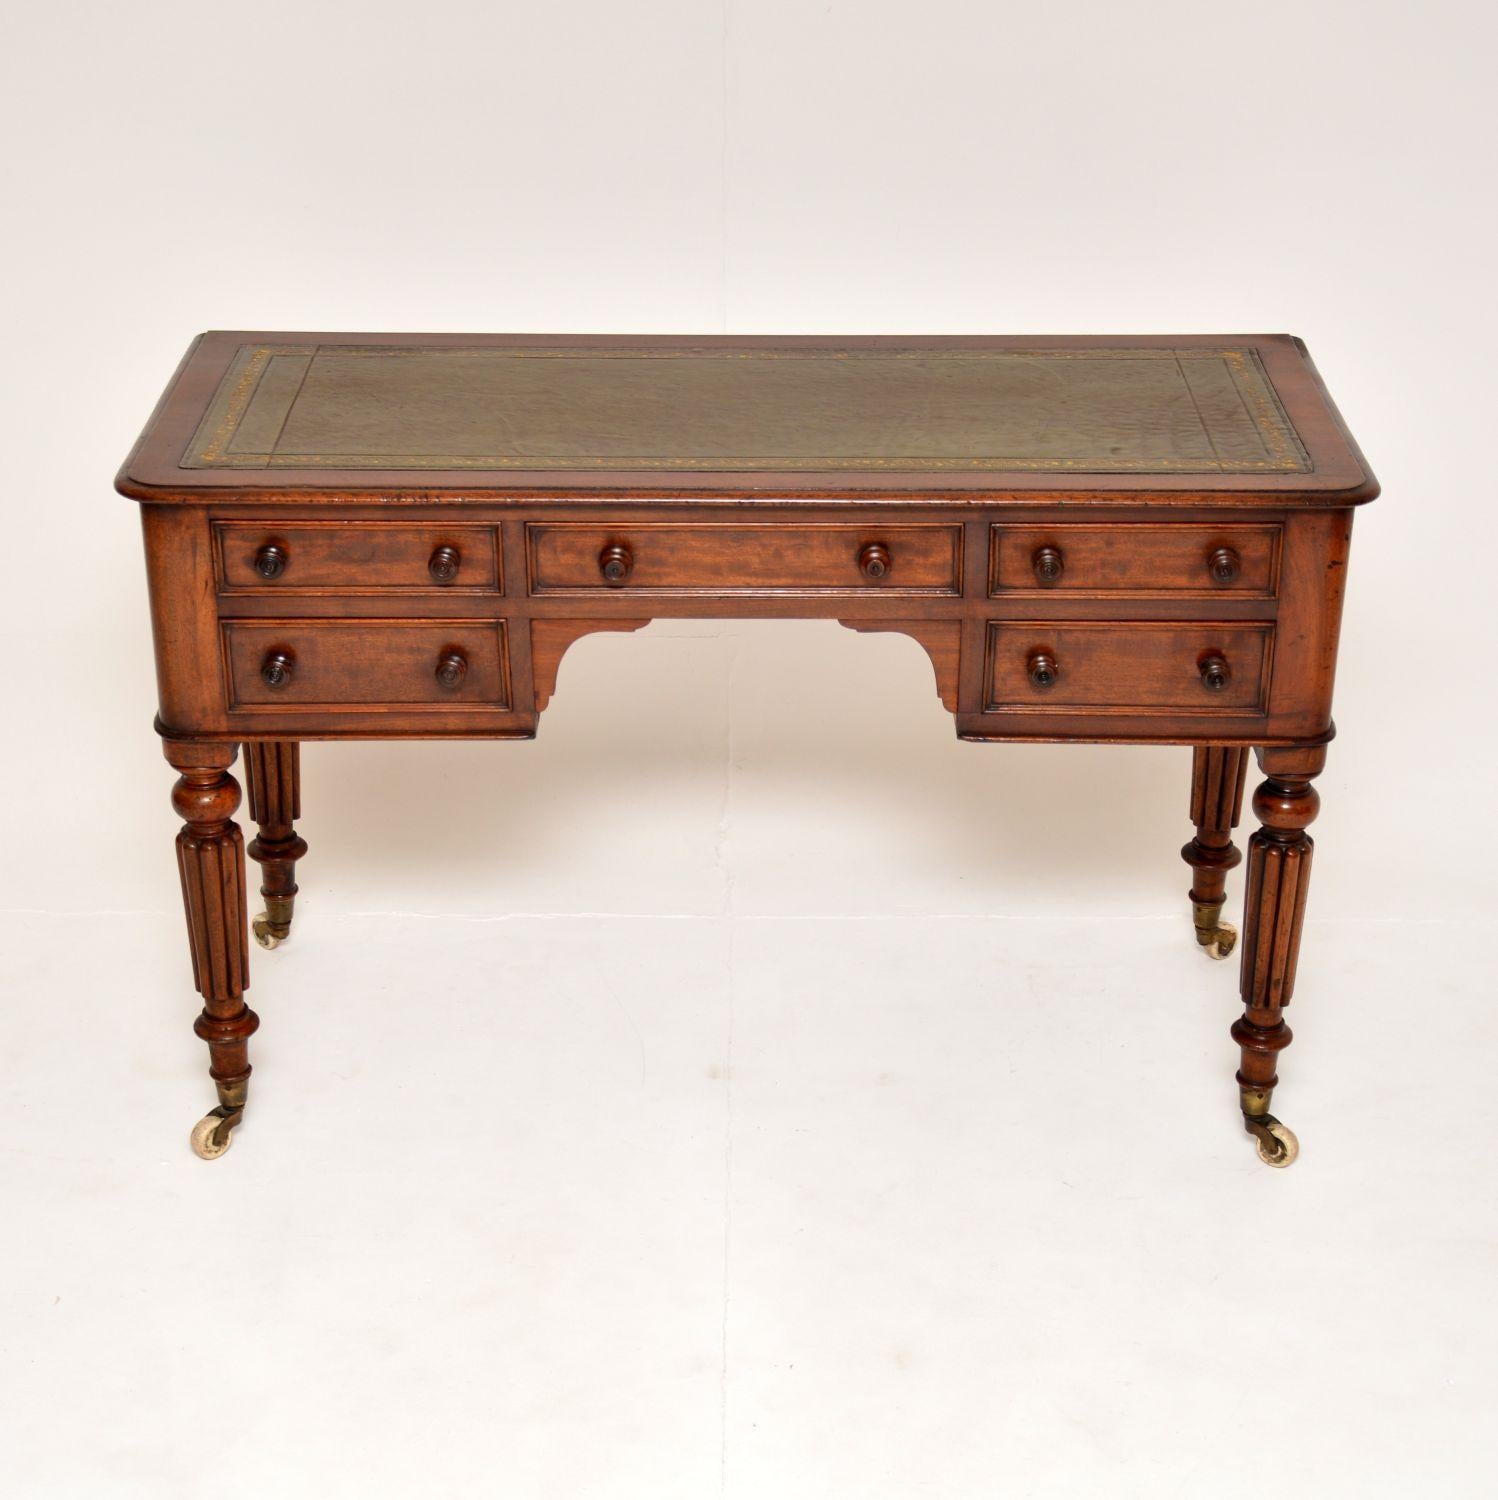 English Antique Victorian Leather Top Desk / Writing Table